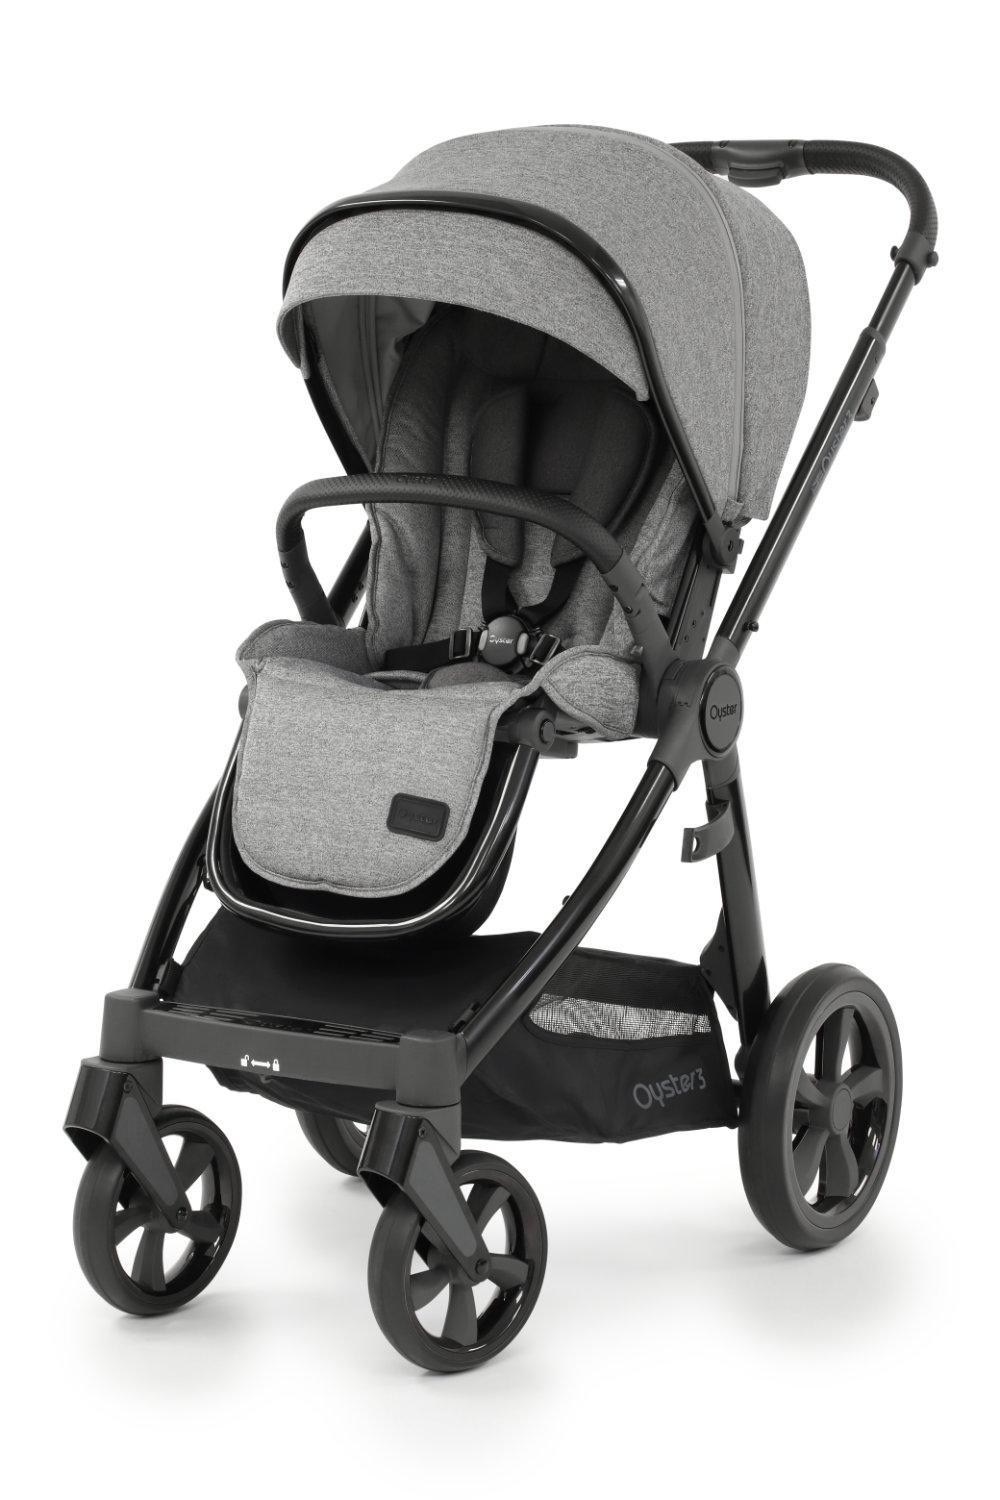 BabyStyle - BabyStyle Oyster 3 Baby Stroller - Mari Kali Stores Cyprus